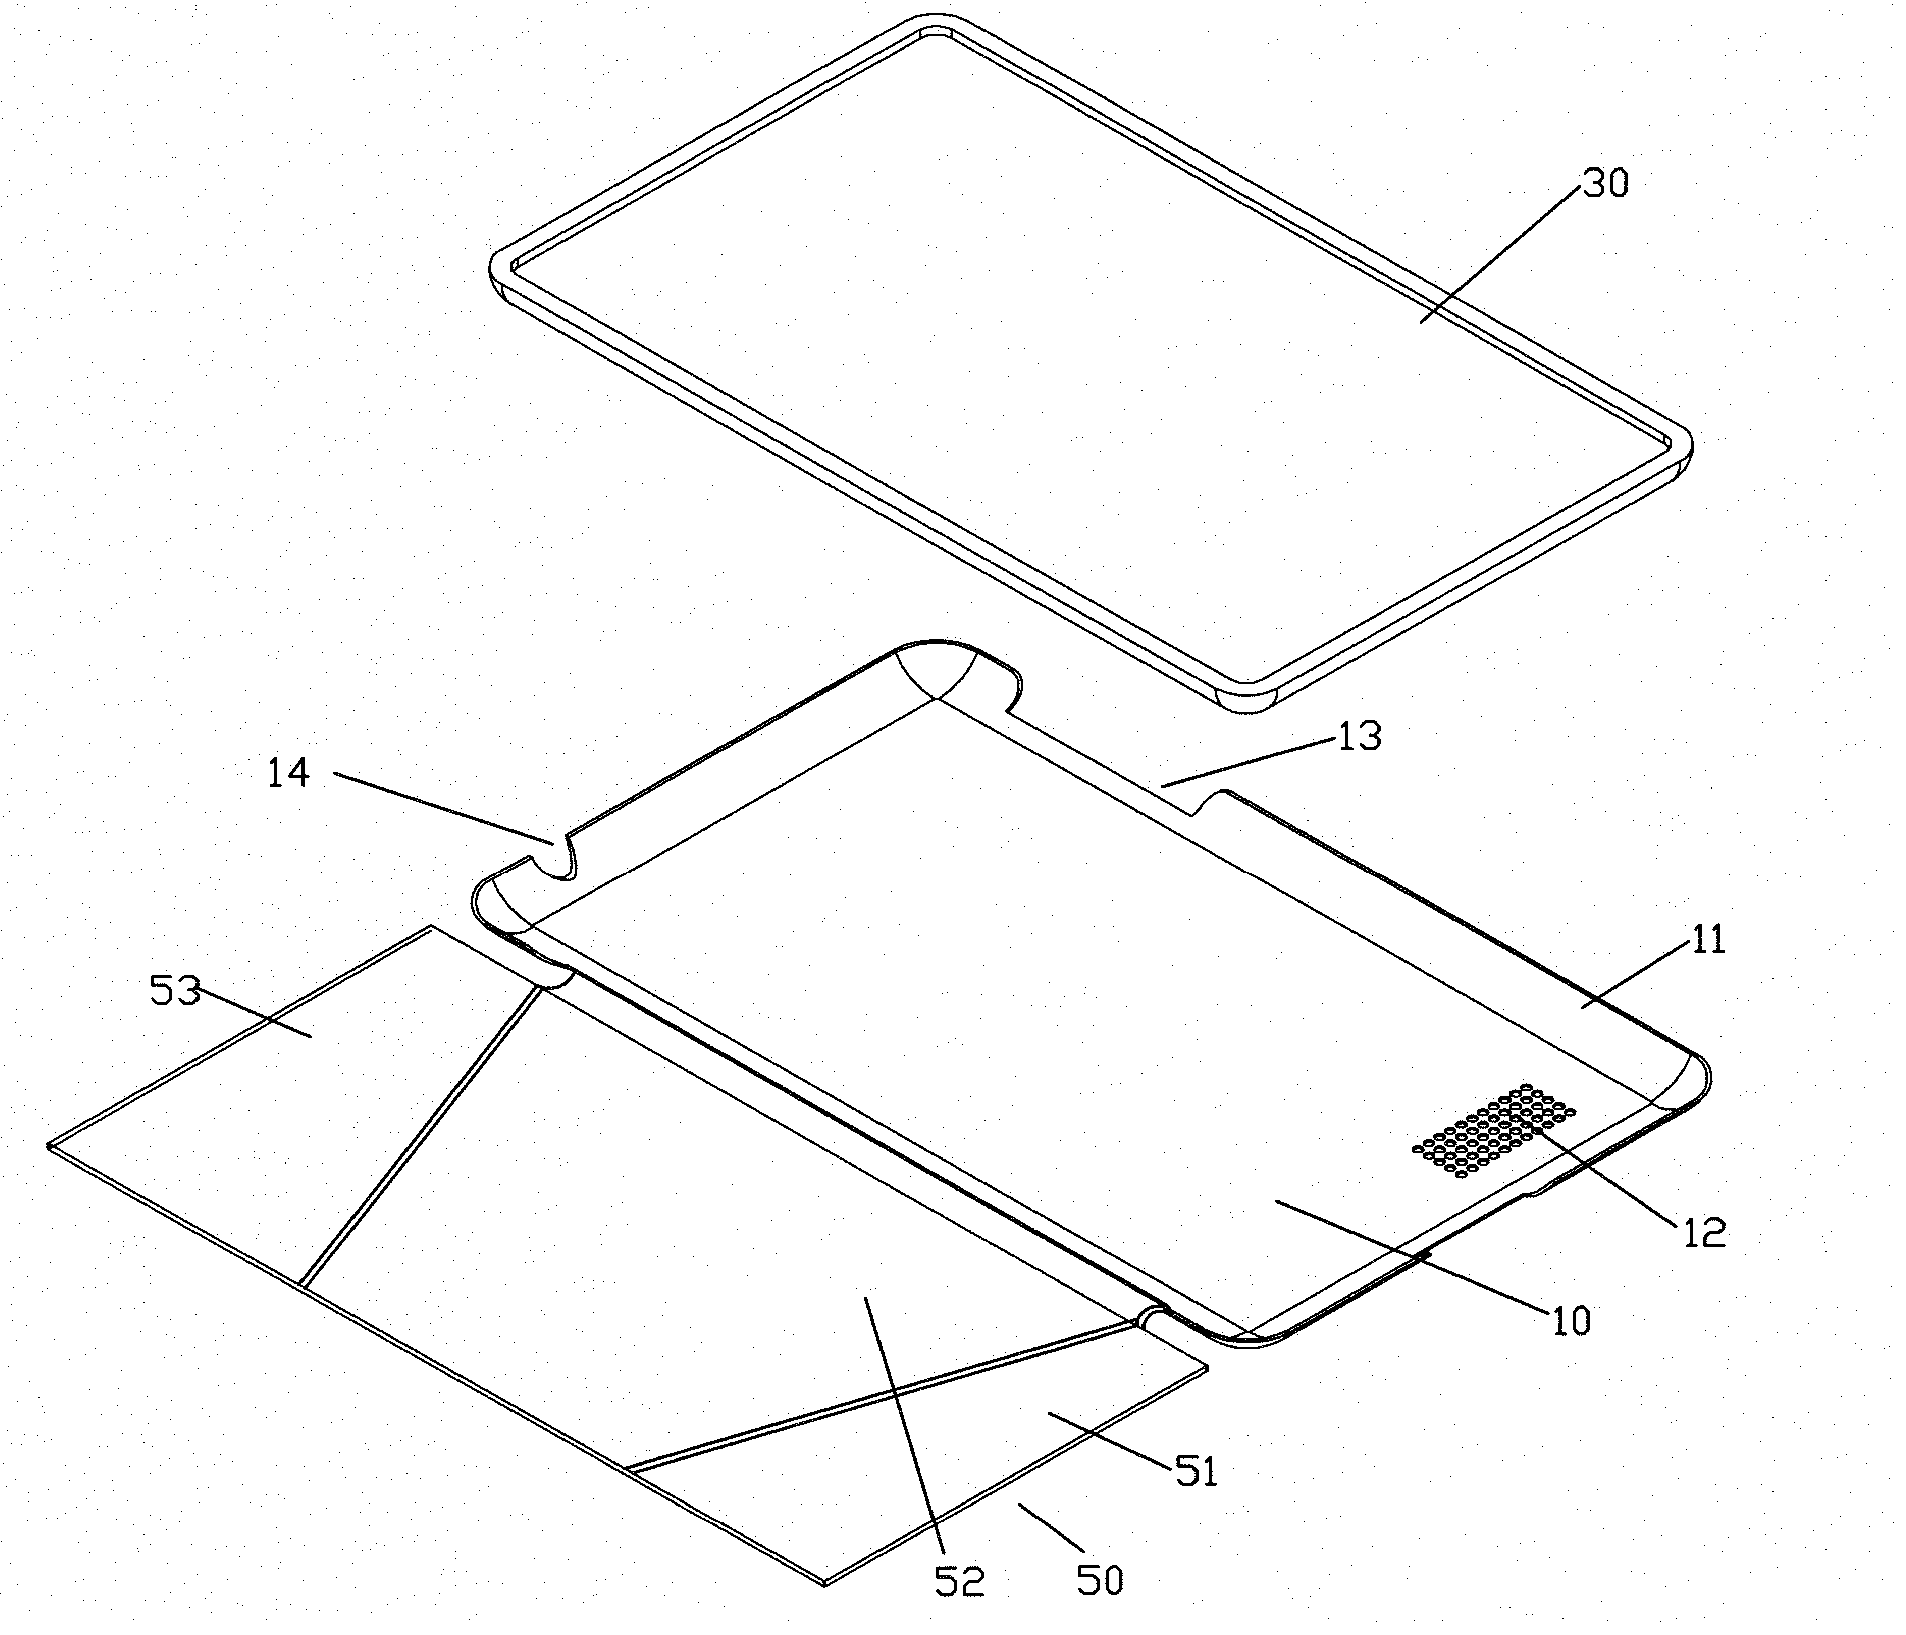 Cover for packaging and supporting tablet computer